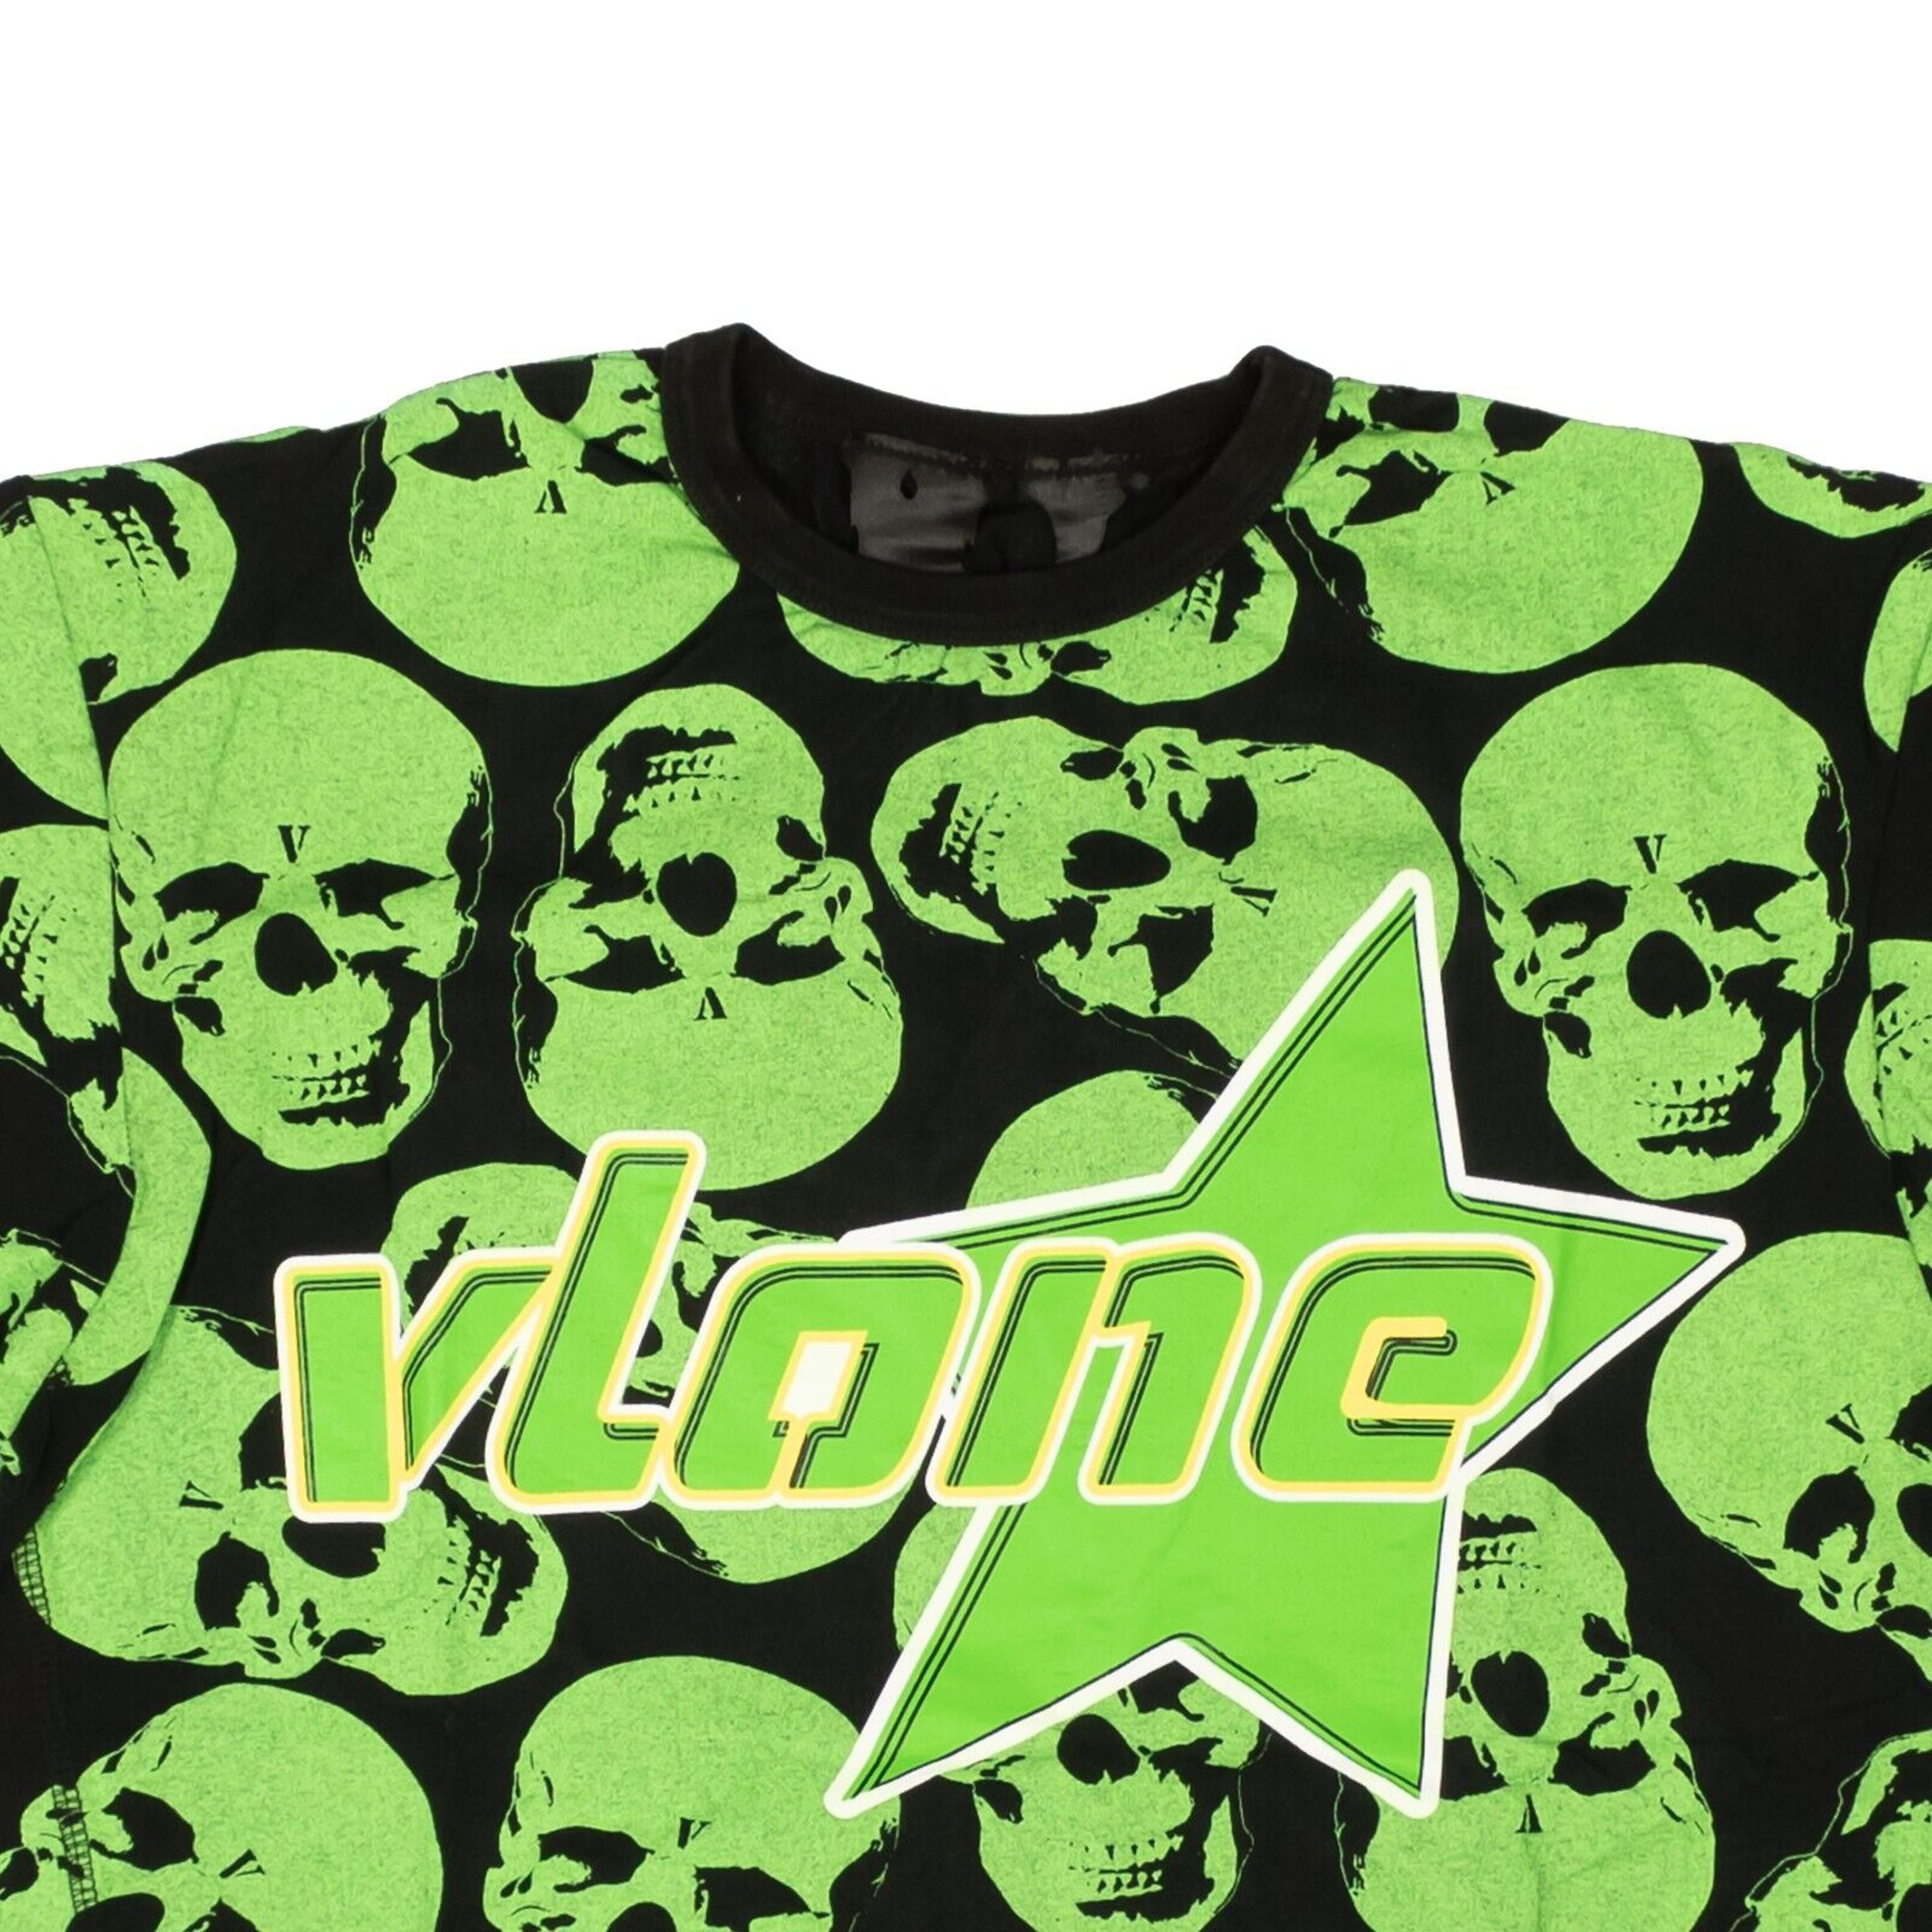 Alternate View 1 of Black And Green Crypt Short Sleeve T-Shirt